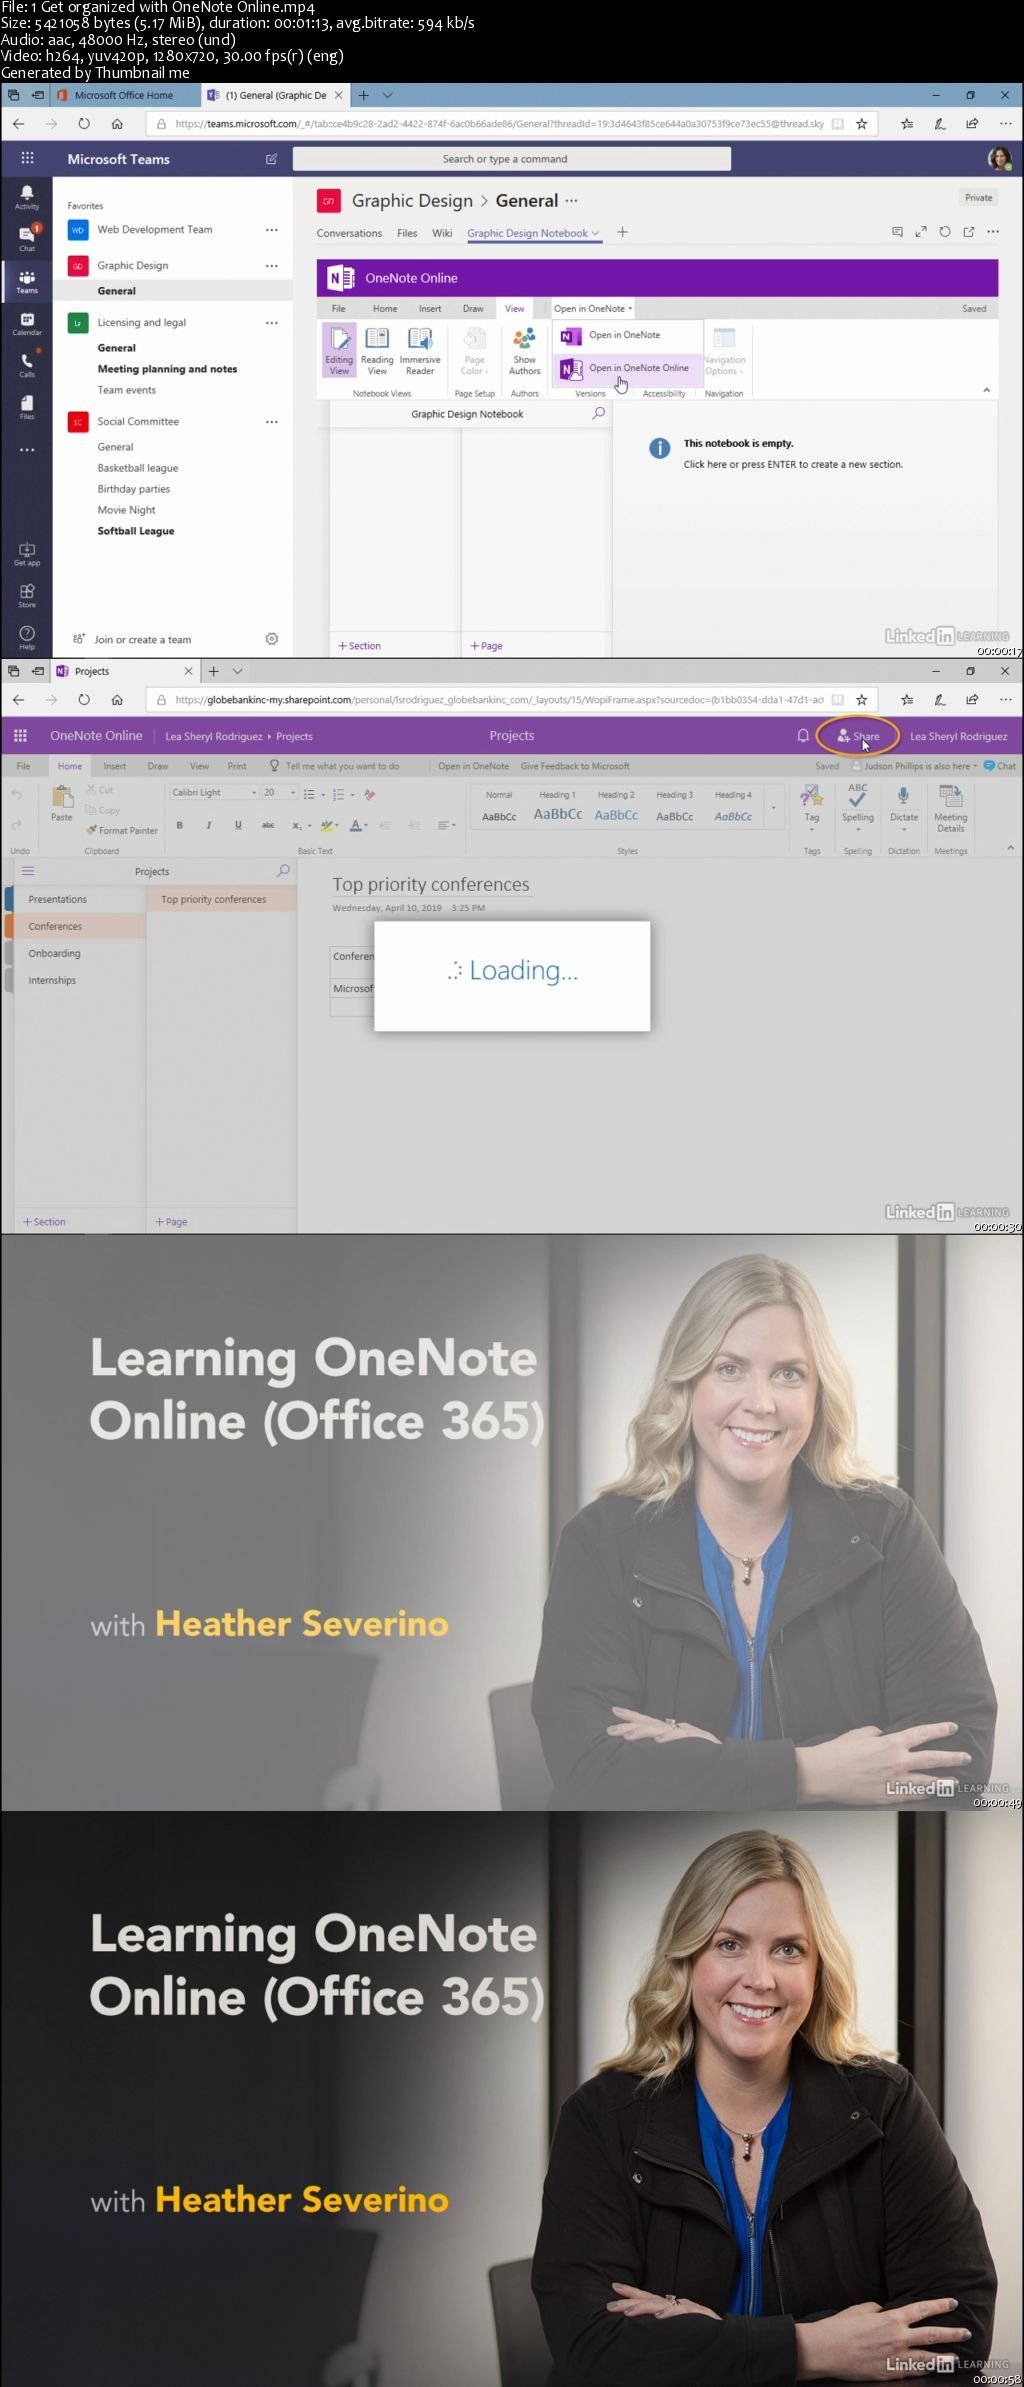 download onenote notebook from office 365